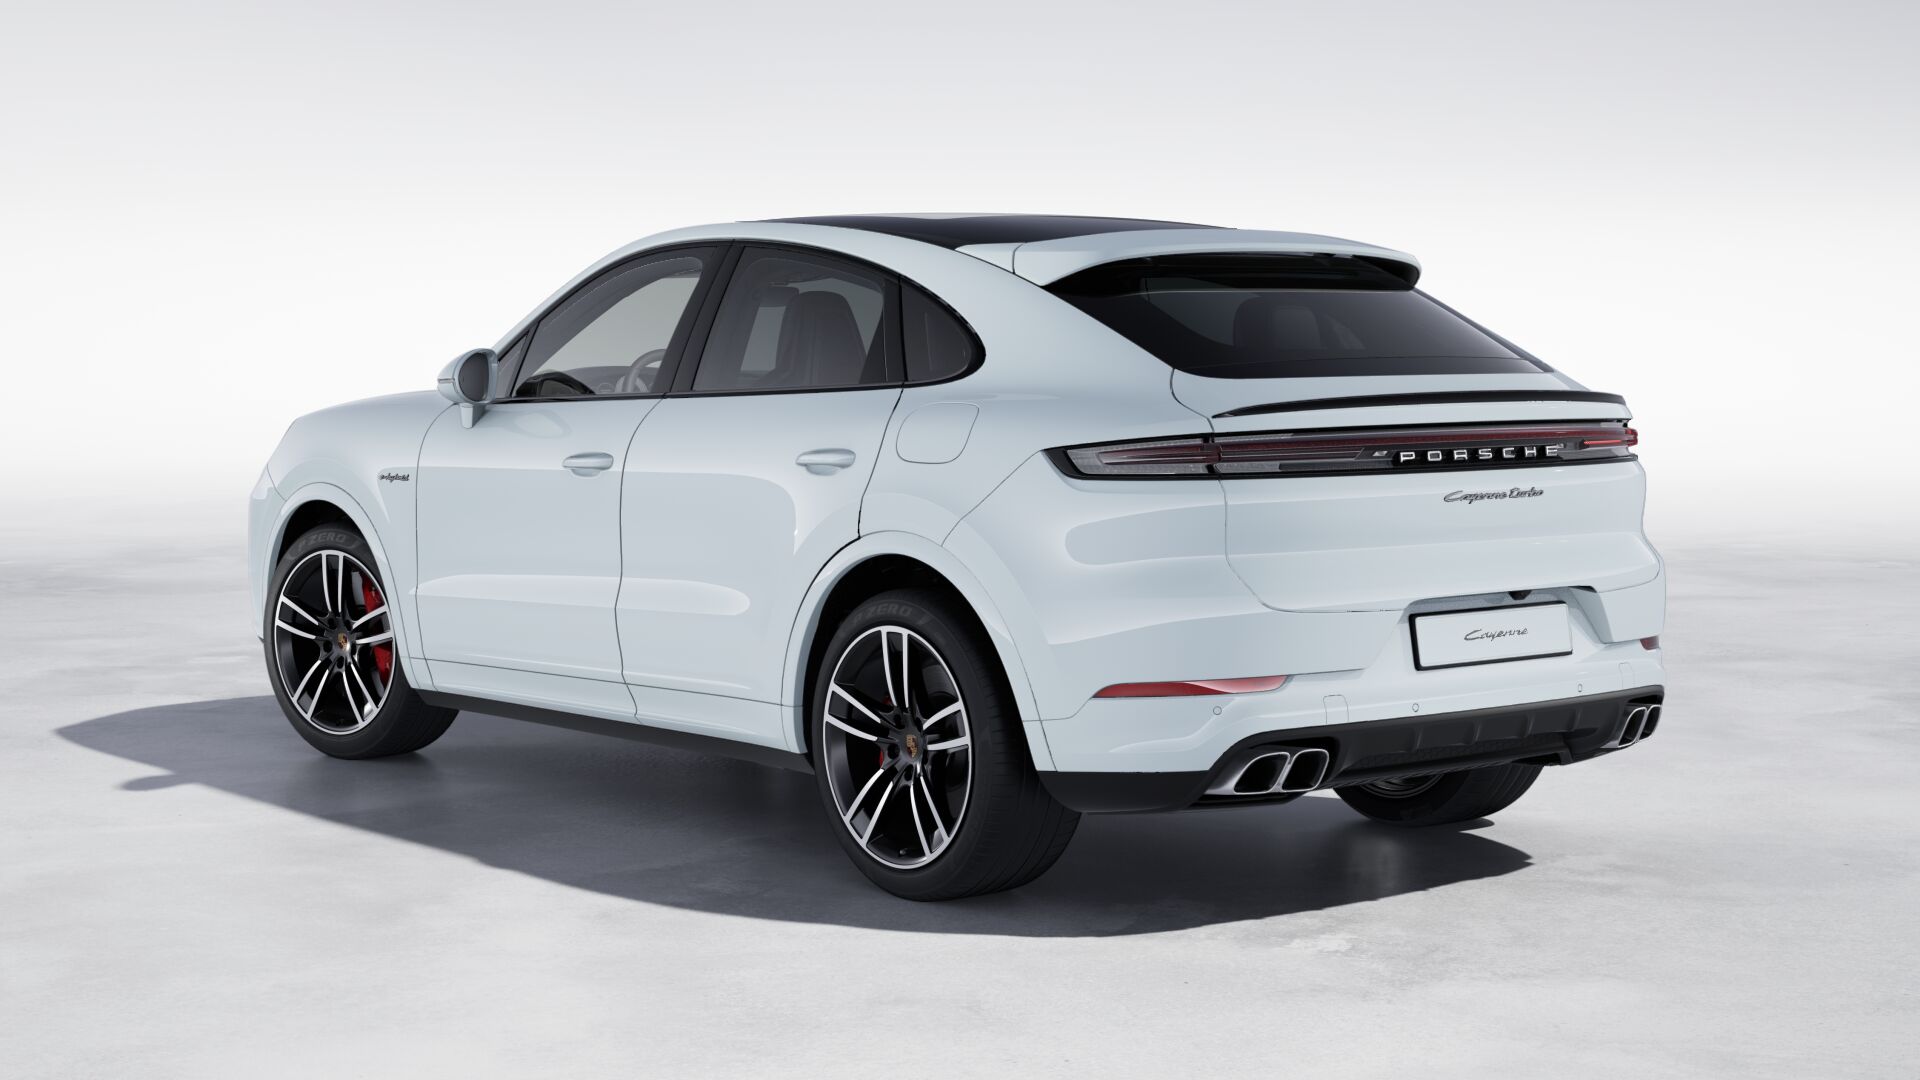 Exterior view of Cayenne Turbo E-Hybrid Coupe